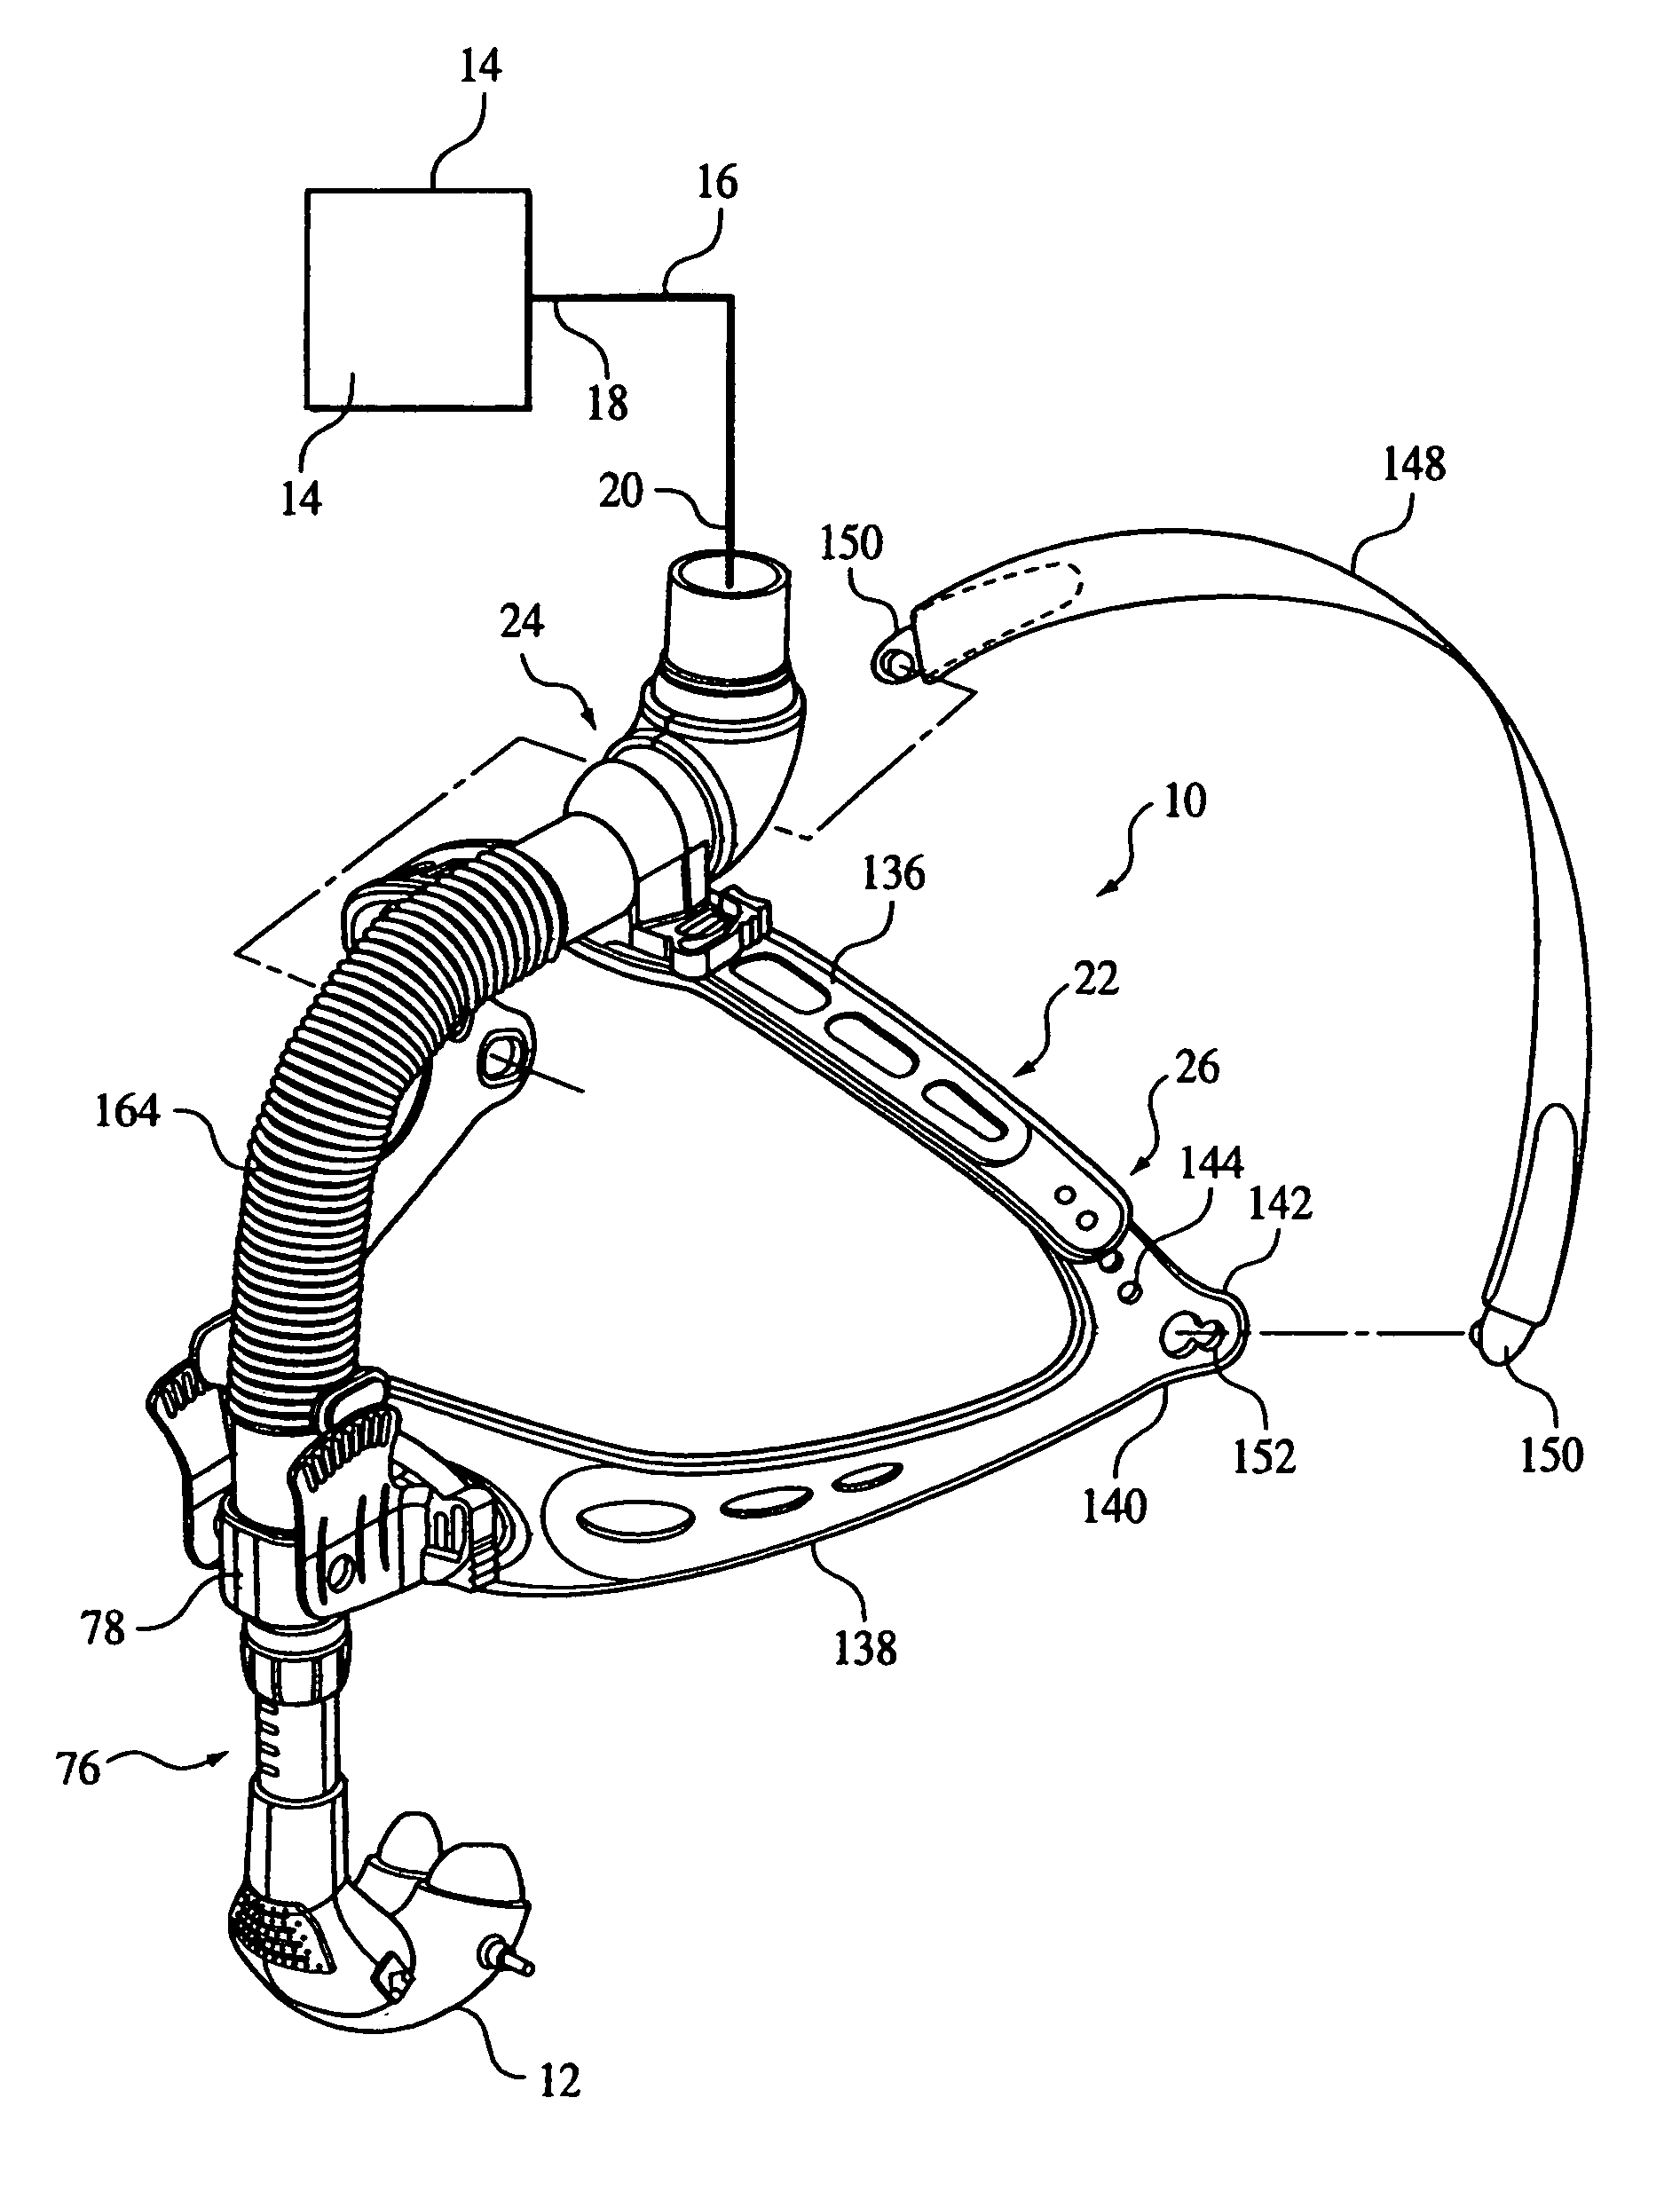 Patient interface assembly and system using same